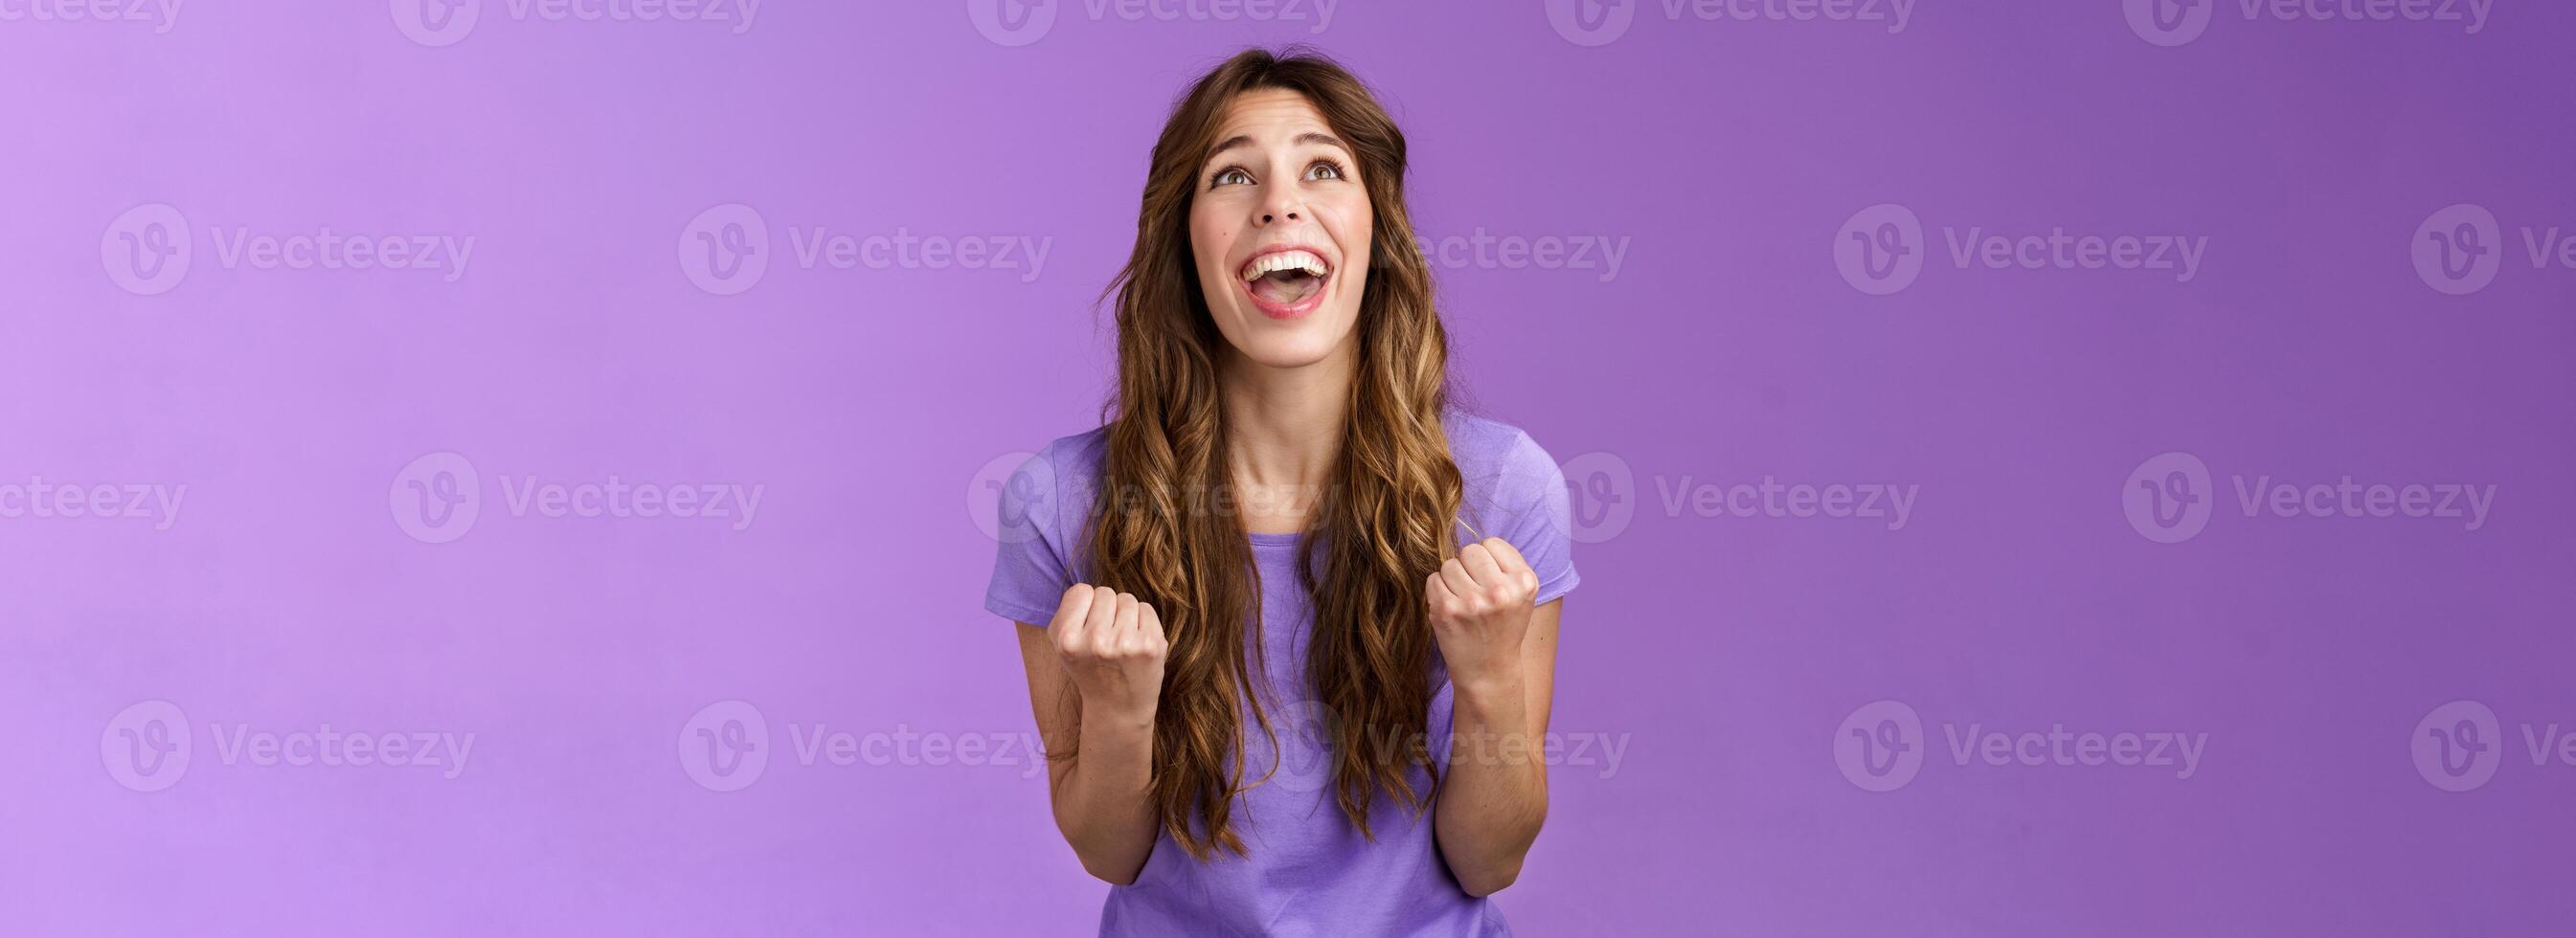 Relieved happy girl thank god awesome achievement celebrate success implore lord grateful fist pump yelling raise head up sky triumphing good news stand purple background joyful positive reaction photo